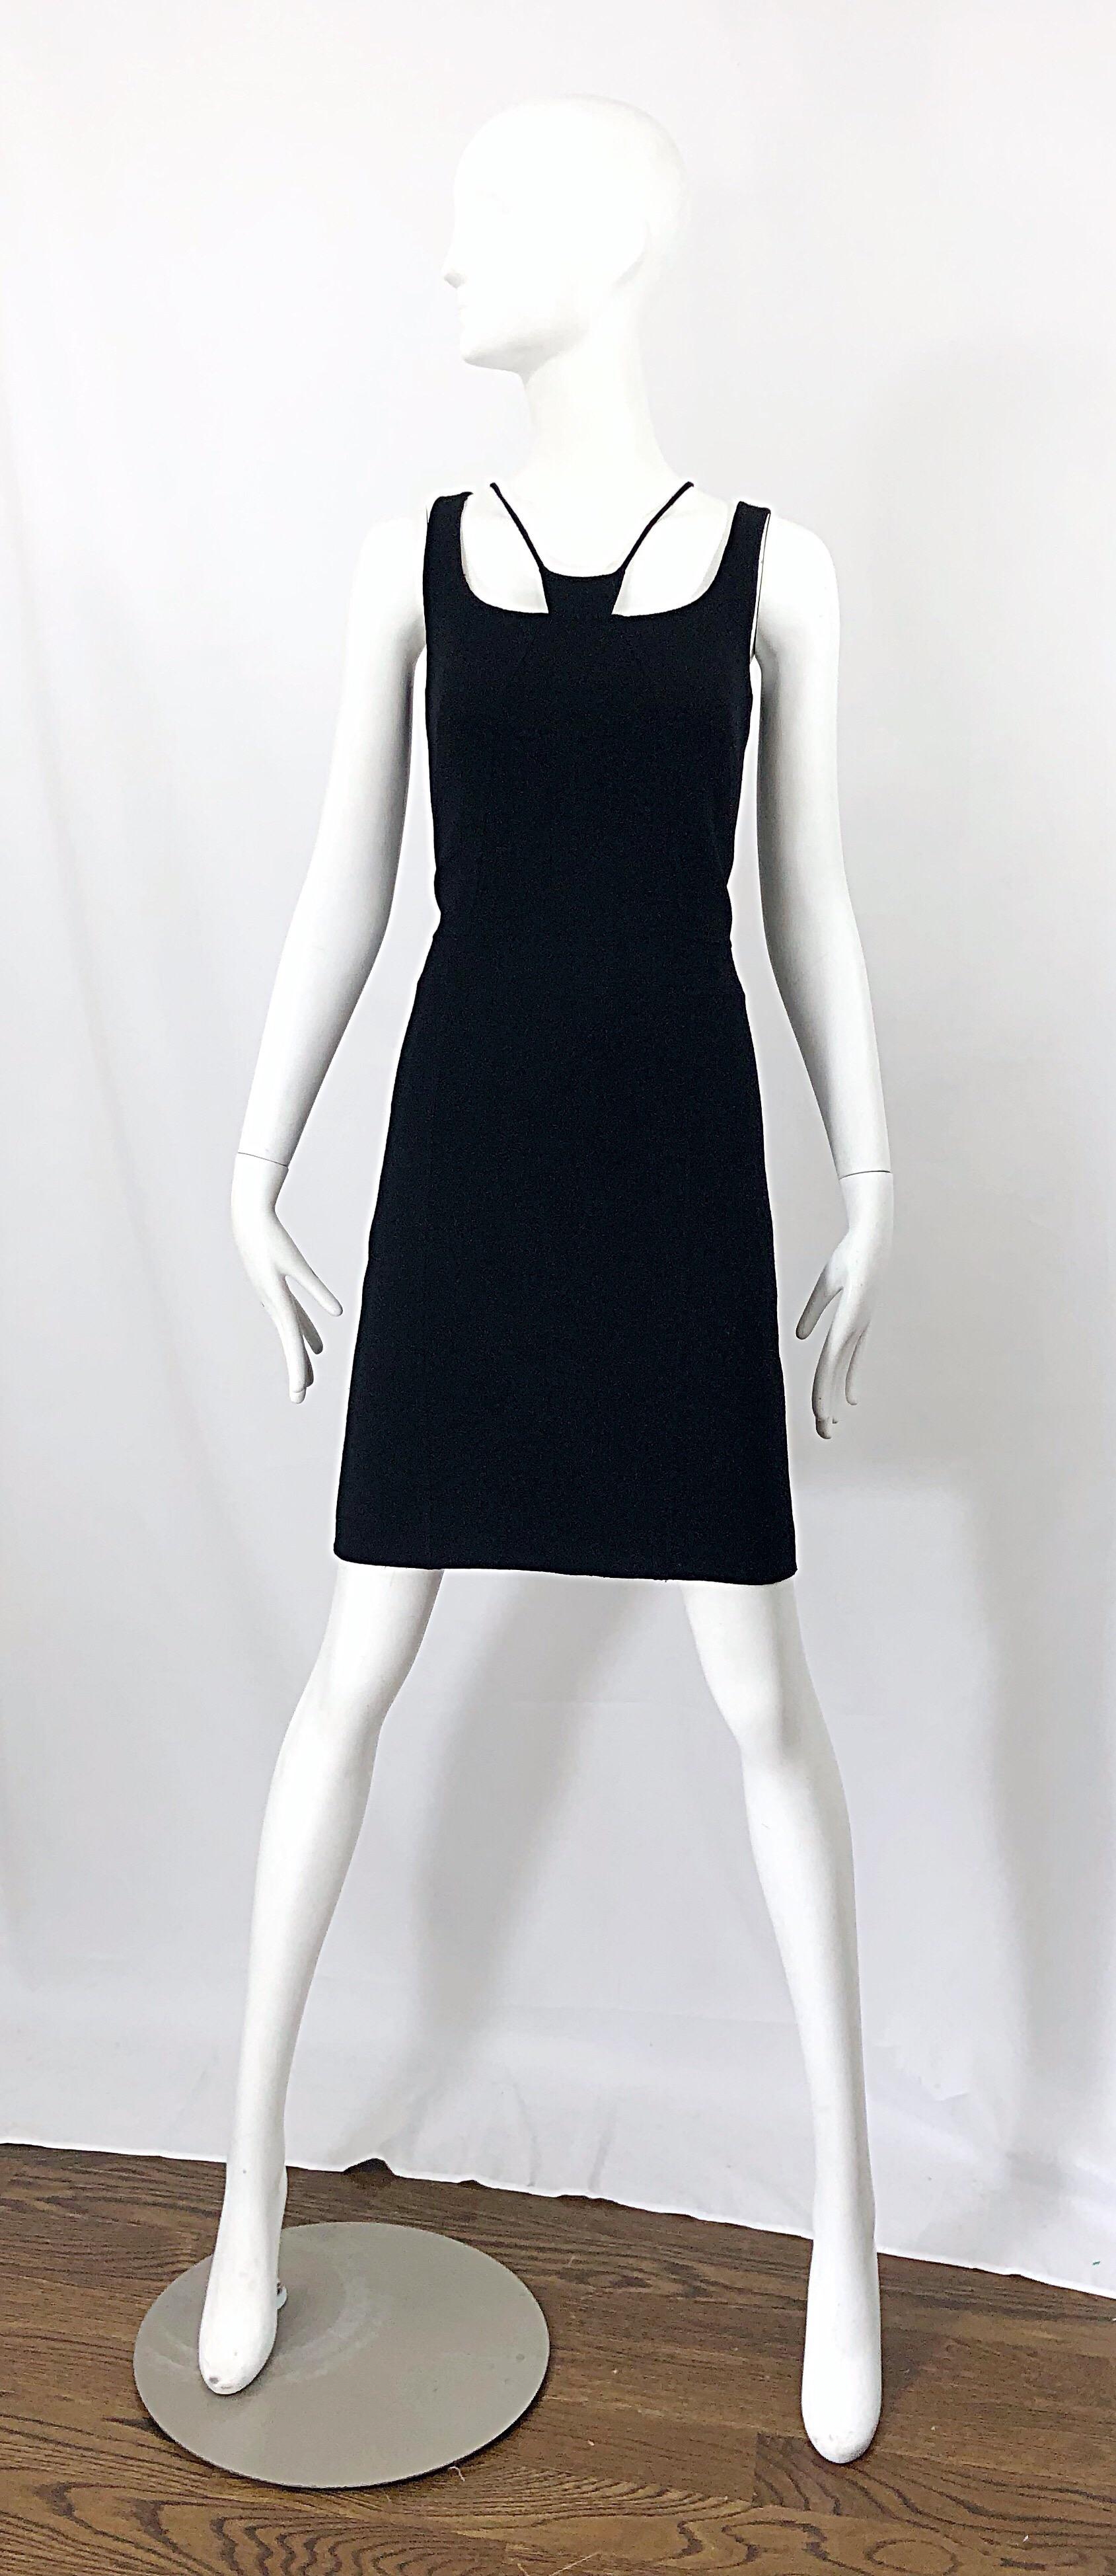 Rare early vintage work by CHADO RALPH RUCCI! The classic little black dress, with a slight edge. Bondage inspired neck. Hidden curved zipper up a side back seam. Lightweight wool is perfect for any time of year. Fully lined. Couture quality one